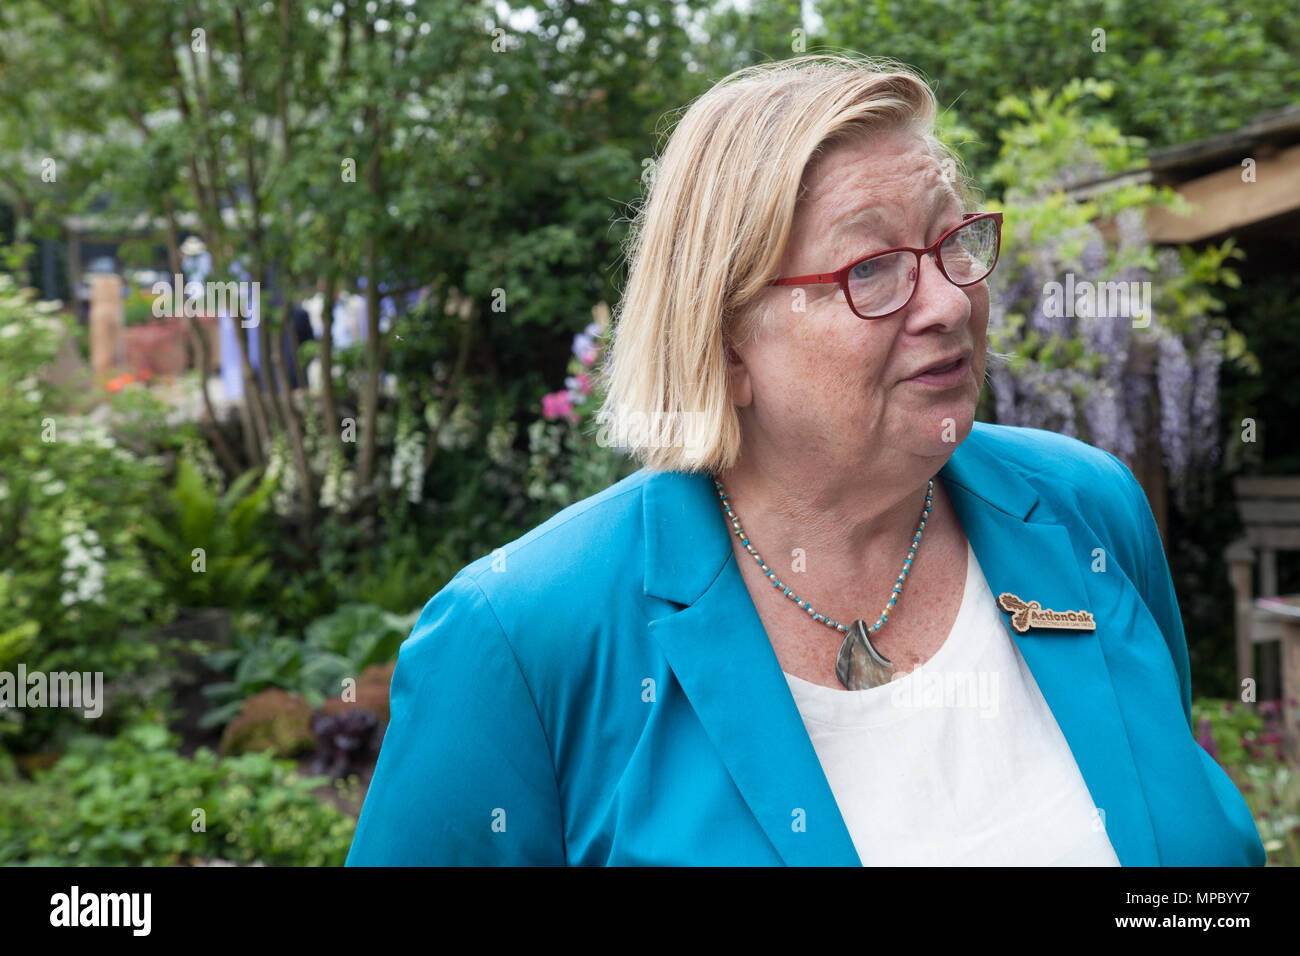 Chelsea, London, UK. 21st May, 2018. Chelsea, London, UK. 21st May 2018. Rosemary Shrager on the Welcome to Yorkshire garden at Chelsea Flower Show 2018, designed by Mark Gregory for Landformconsultants.co.uk Credit: Jenny Lilly/Alamy Live News Stock Photo